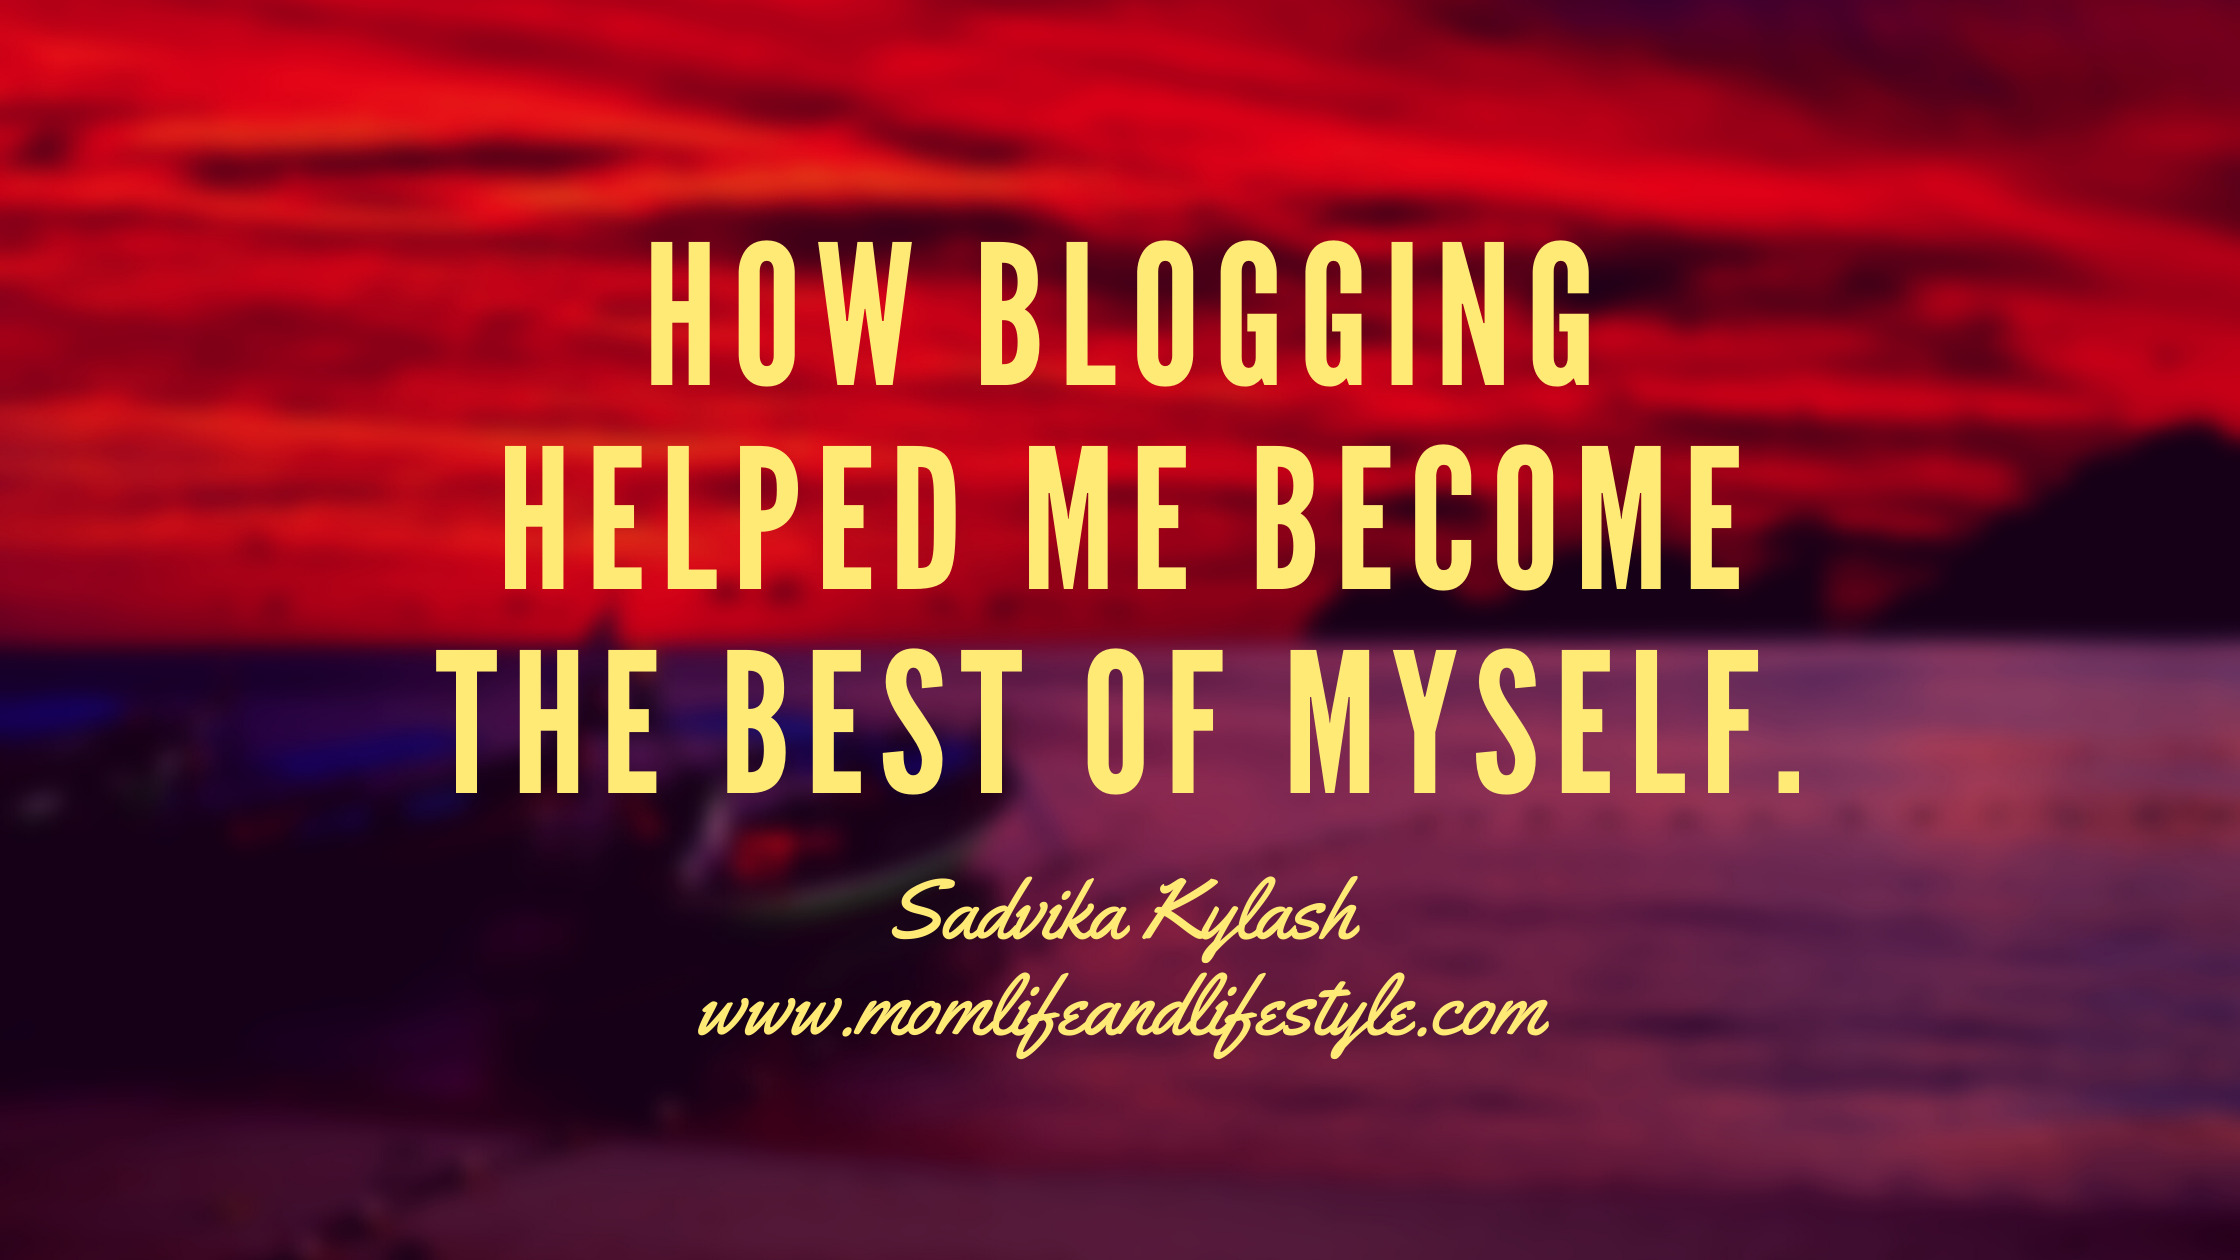 How blogging helped me become the best of myself.